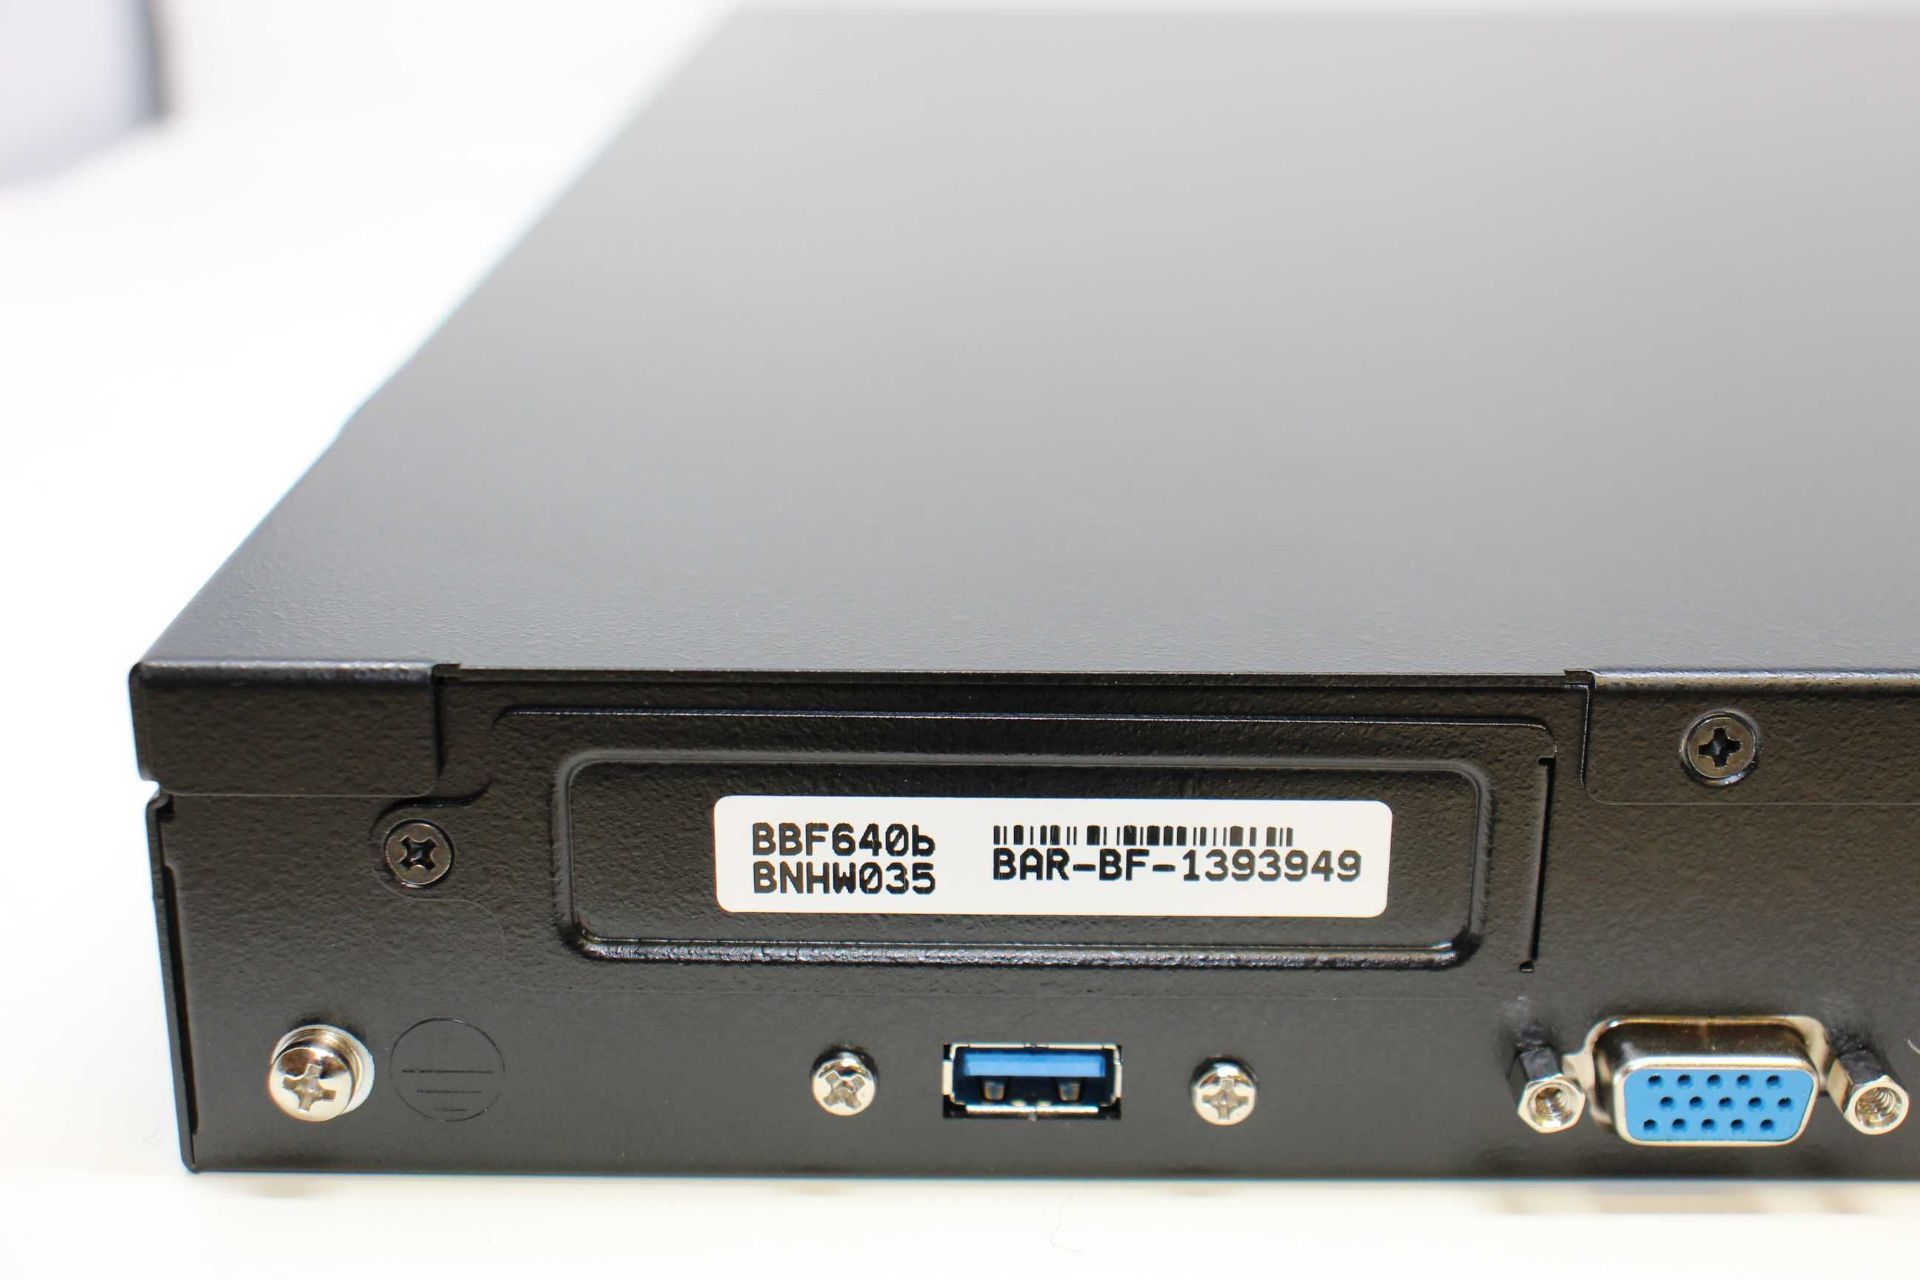 A boxed as new Barracuda Load Balancer ADC 640 (BBF640B BAR-BF-139349) (Rails, cables and manual - Image 10 of 13